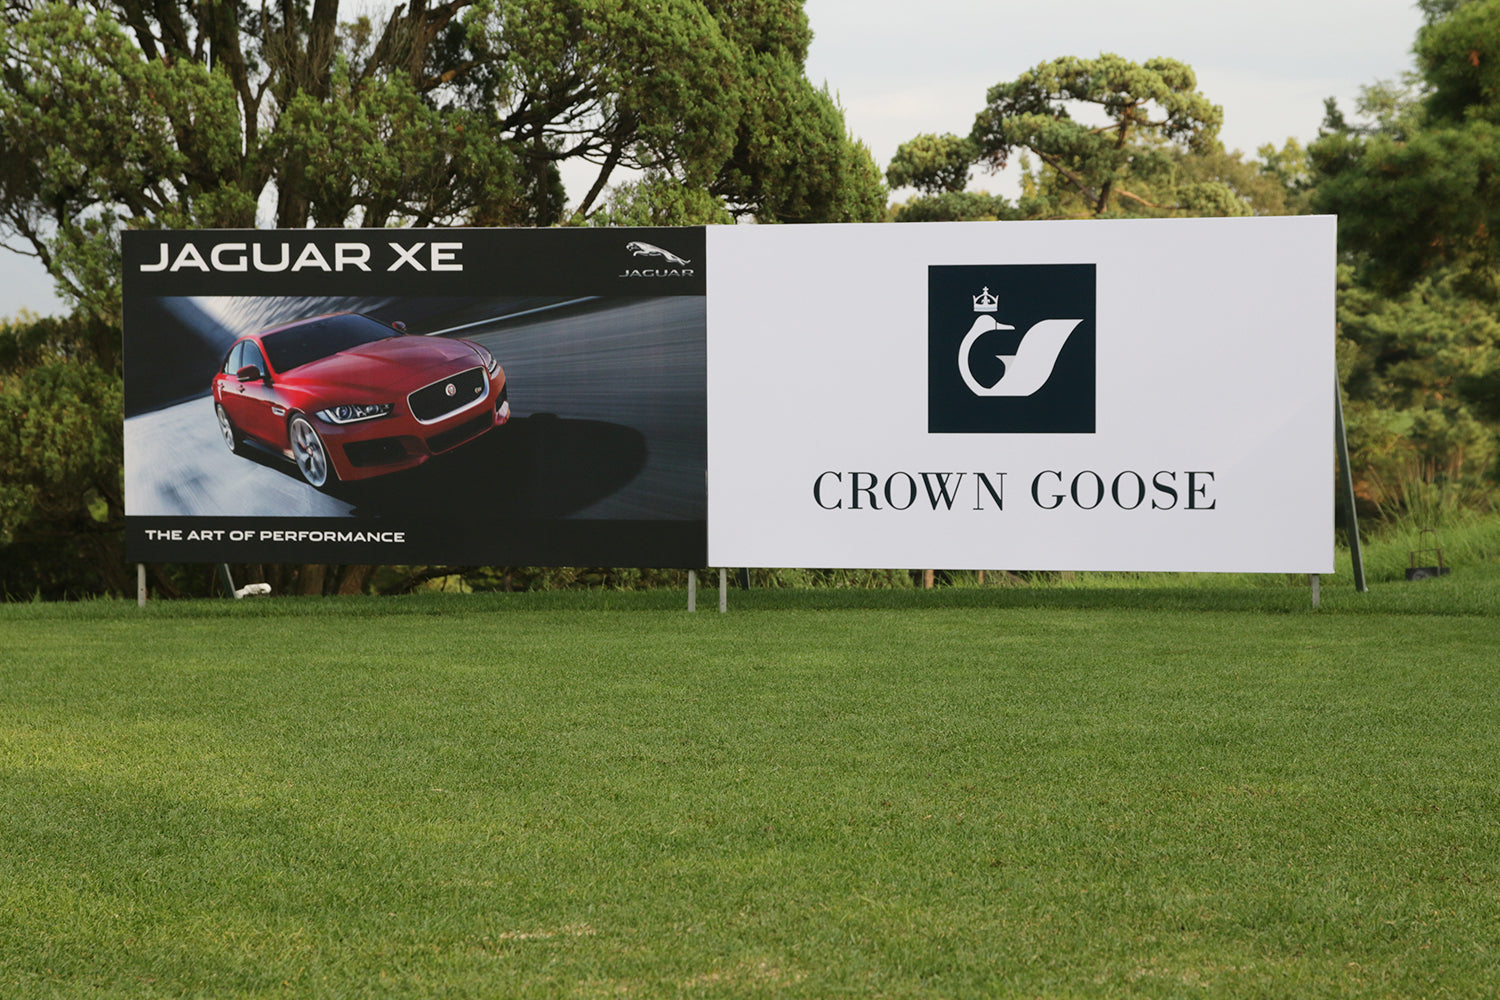 Crown Goose Crown Featured - 2016 JAGUAR & LANDROVER GOLF CLASSIC 2nd